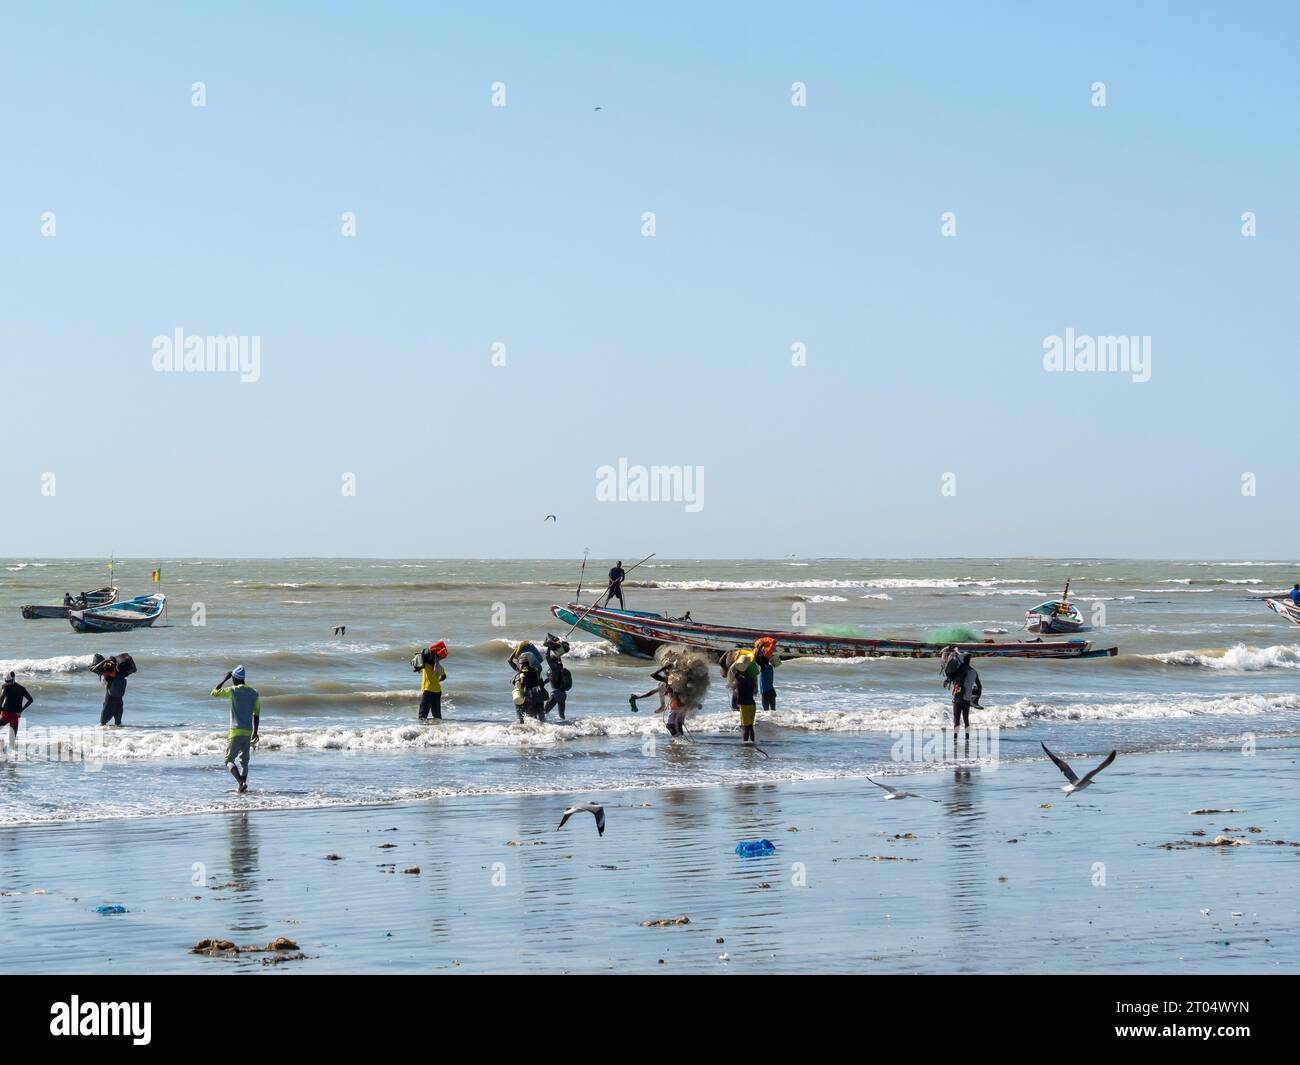 Fisherman at work on the beach in the Gambia, Gambia Stock Photo